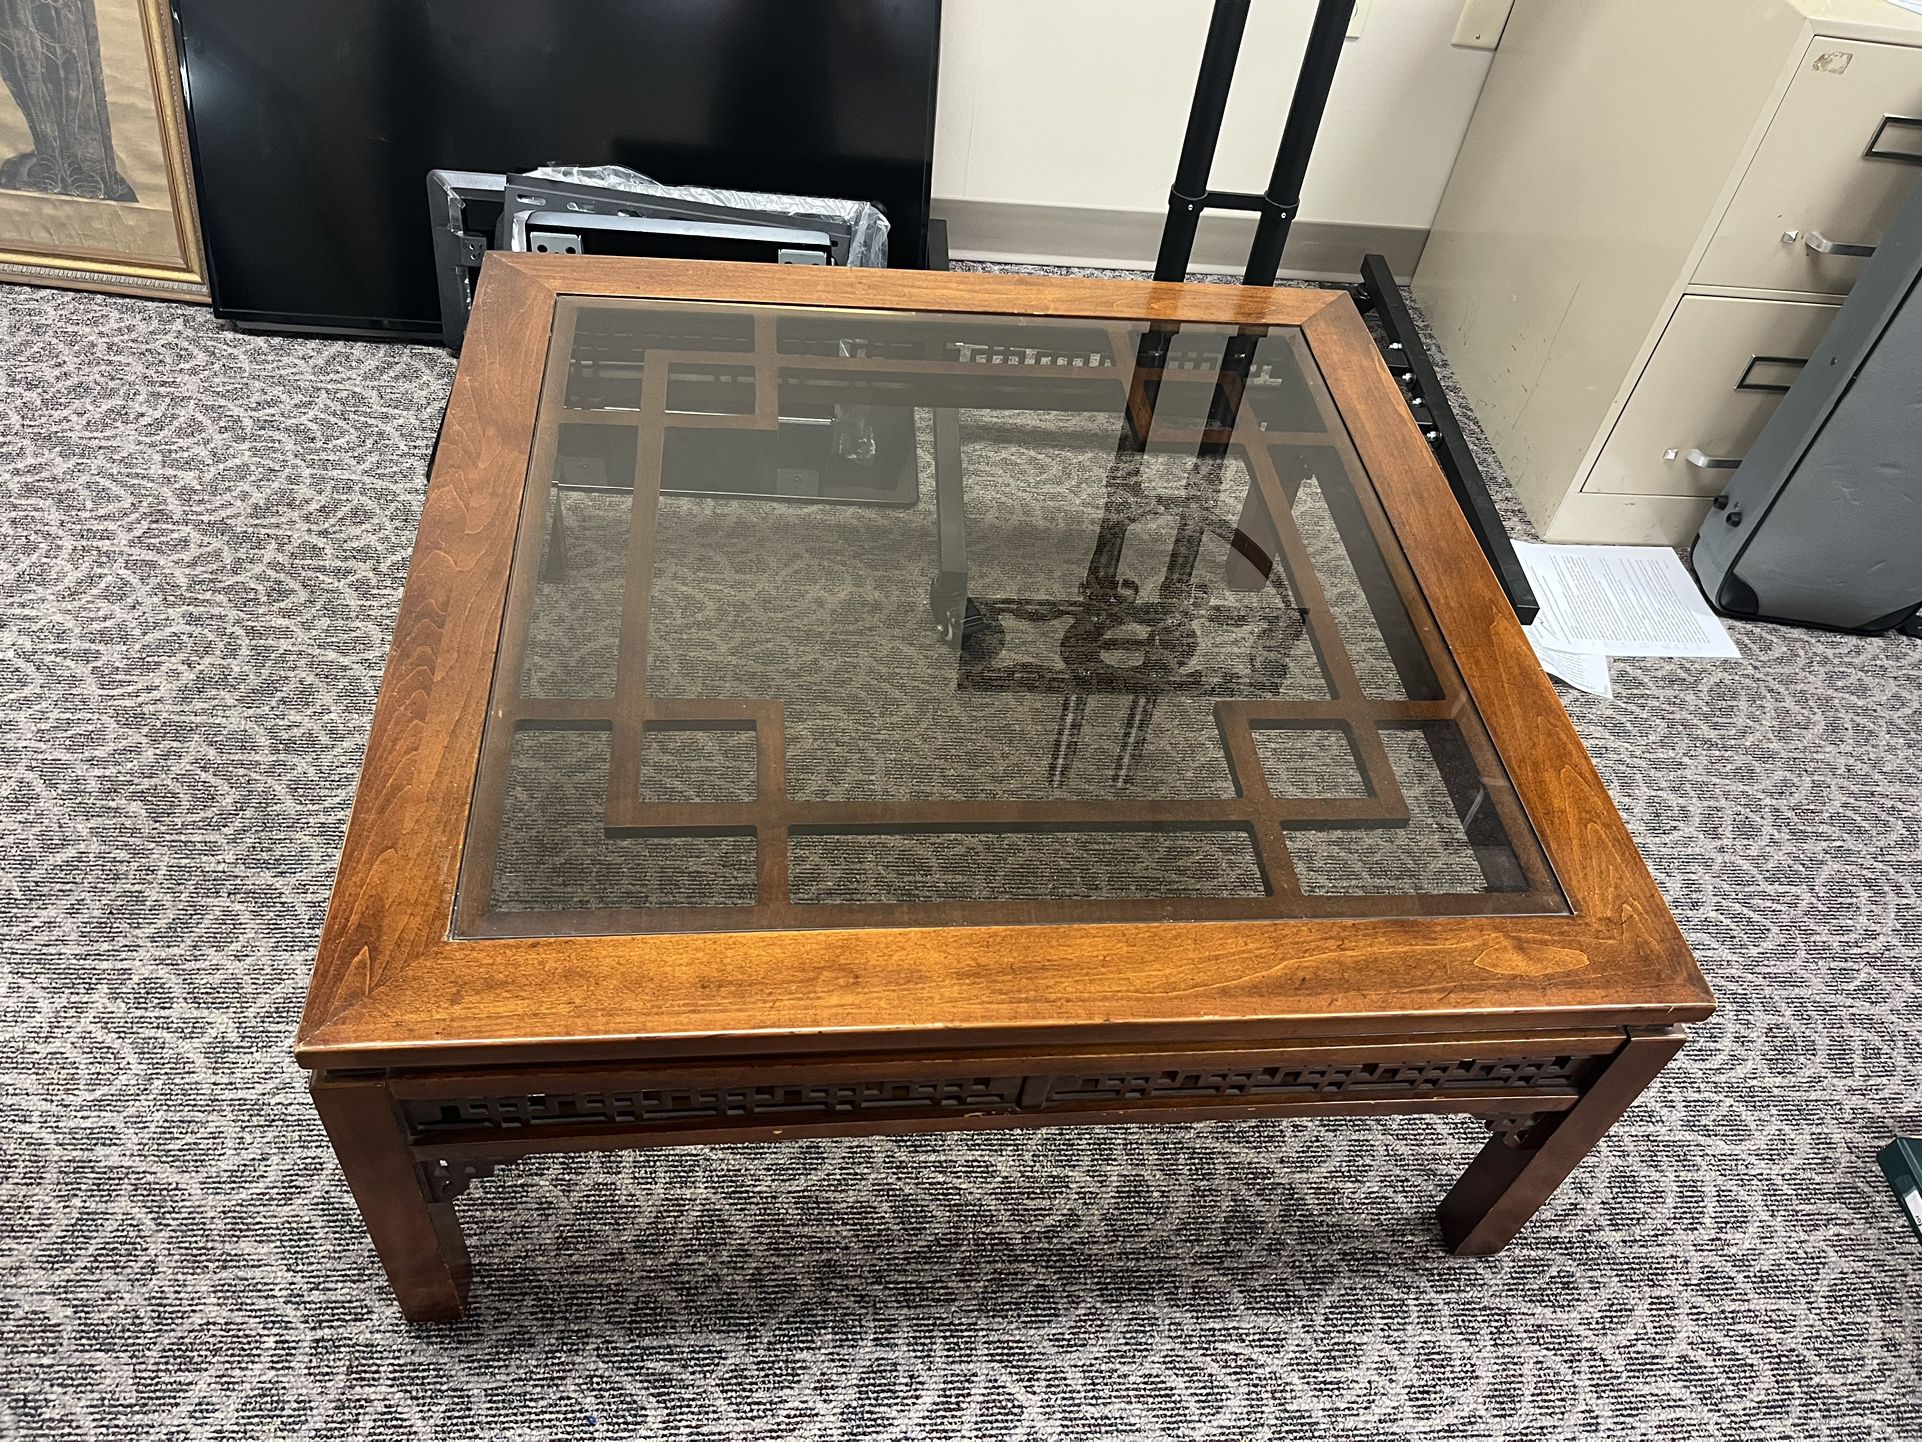 36x36 Glass Top Table